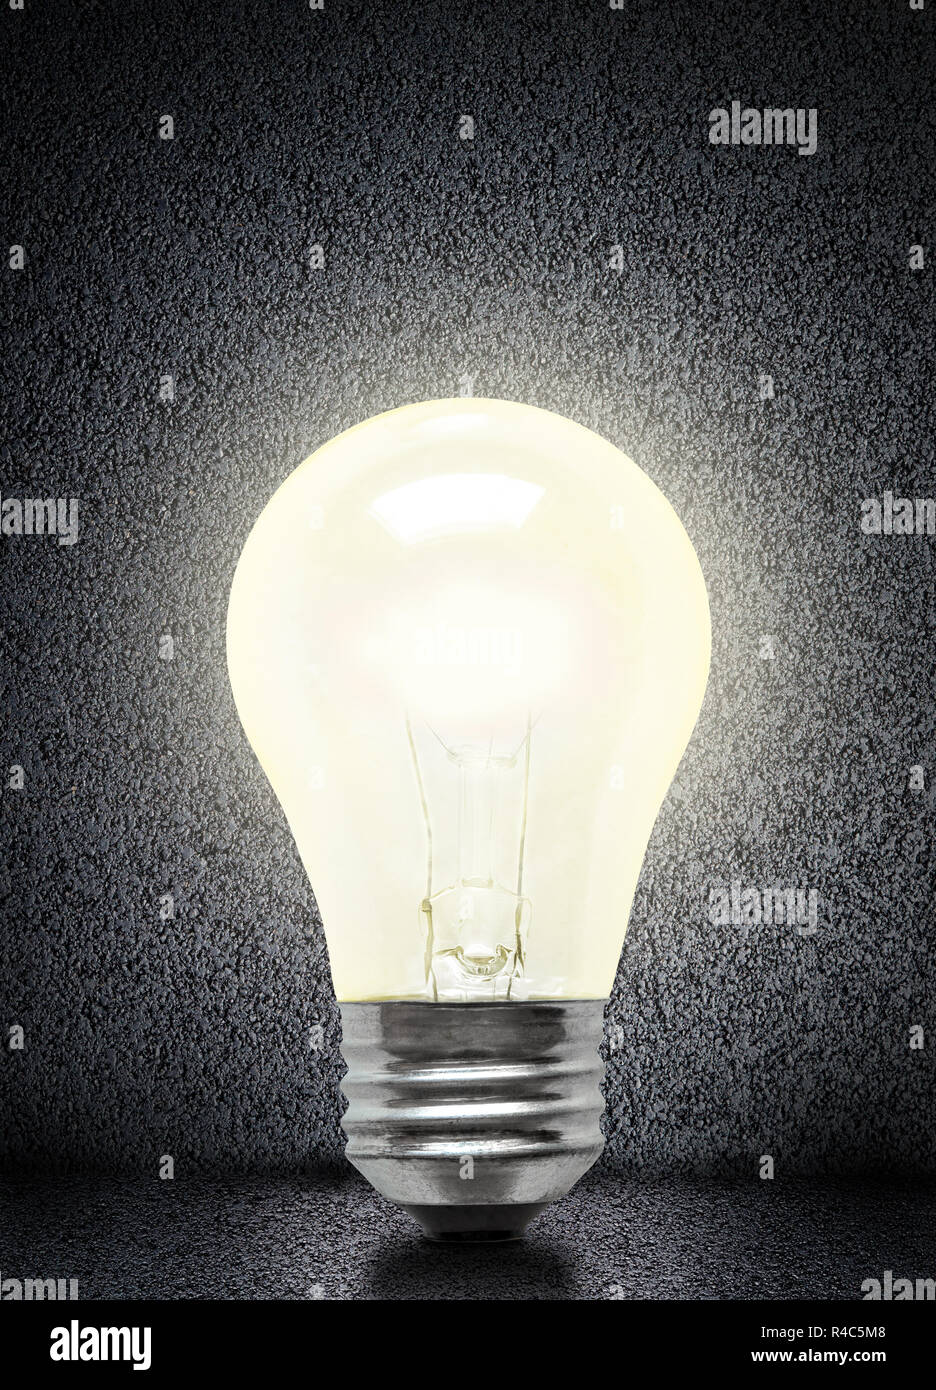 Glowing electrical incandescent light bulb isolated on asphalt background with copy space. Stock Photo